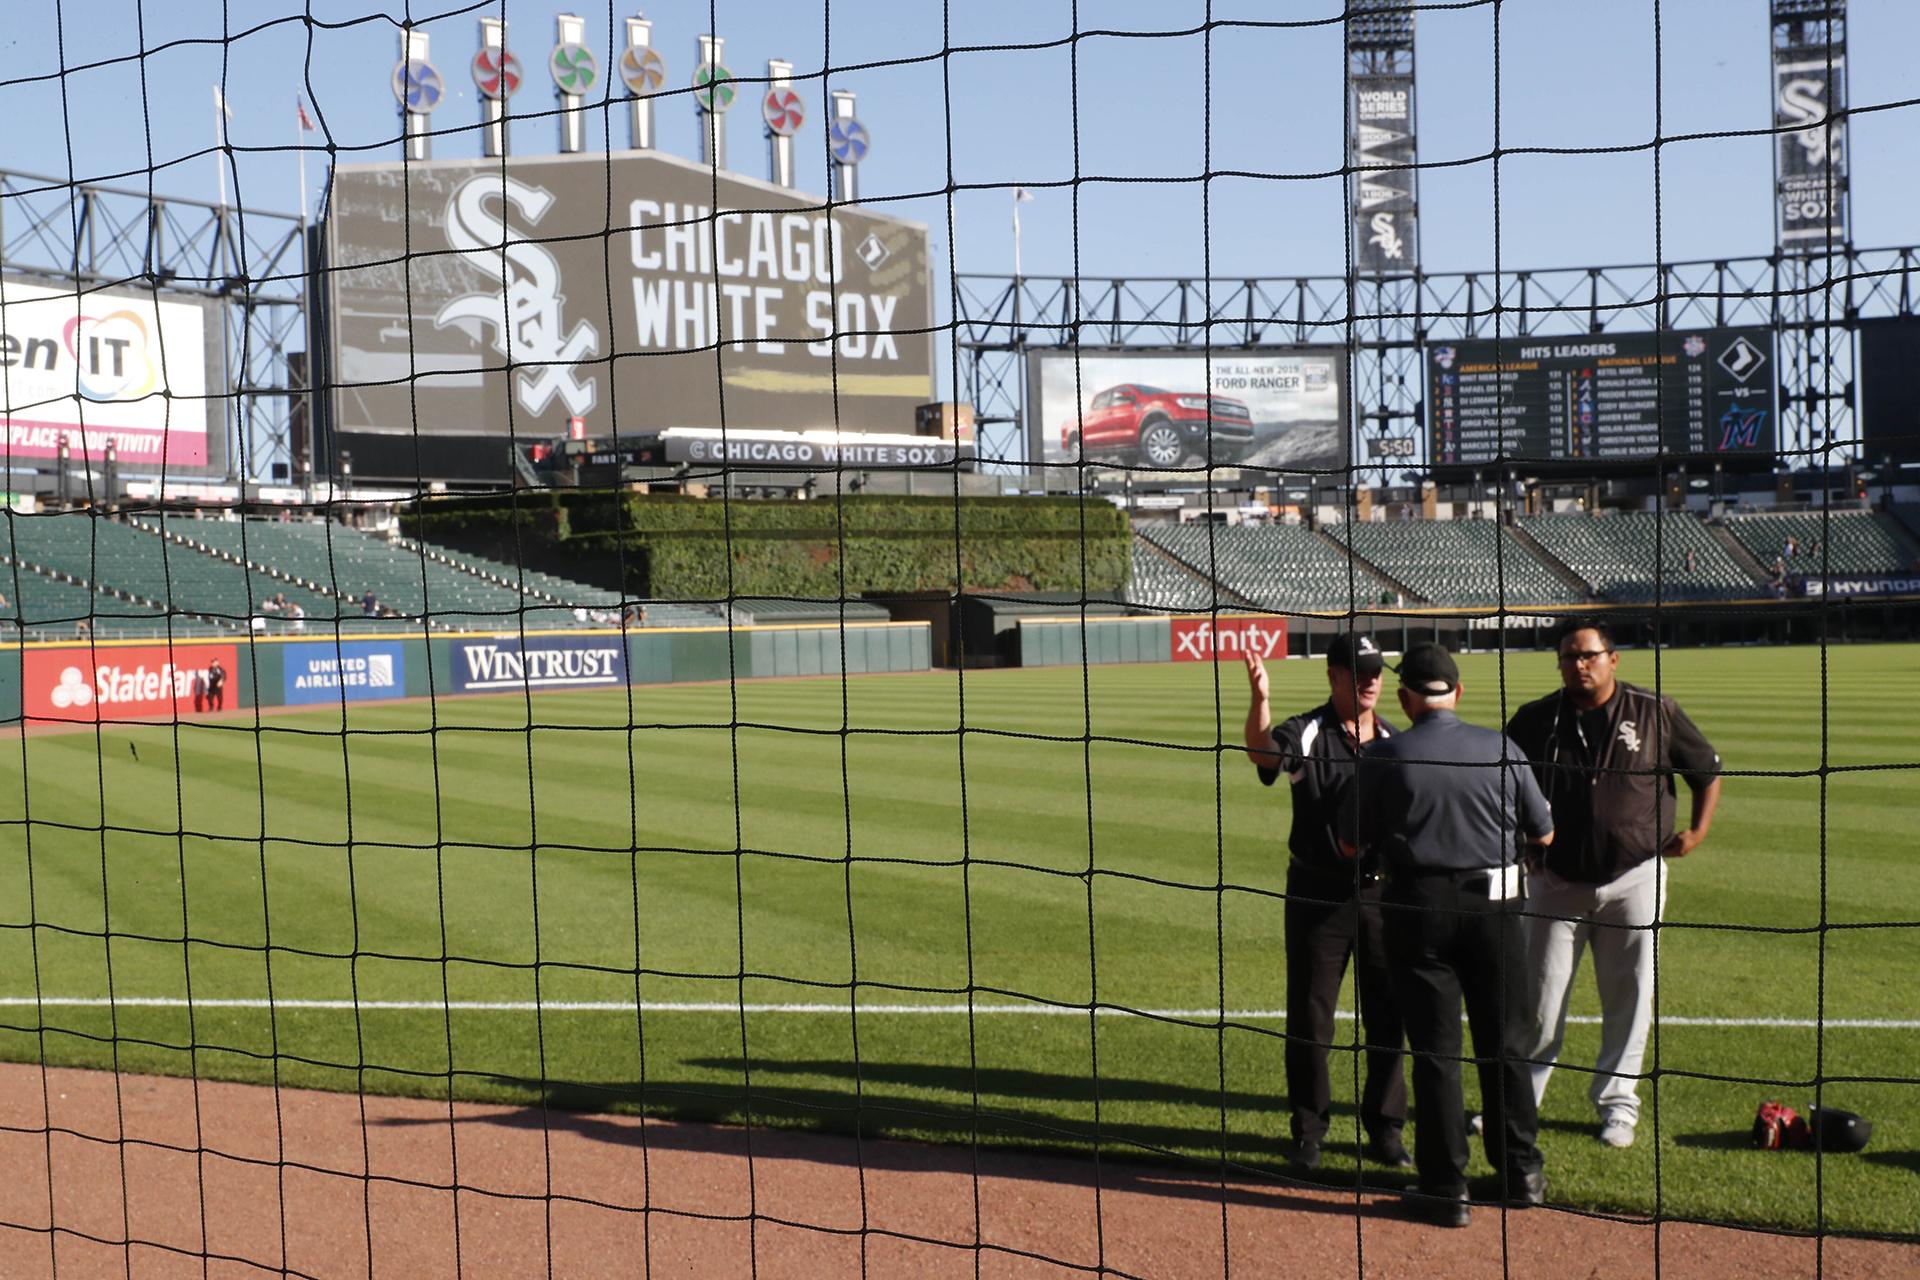 White Sox Host 1st MLB Game with Foul Pole-to-Pole Netting Chicago News WTTW